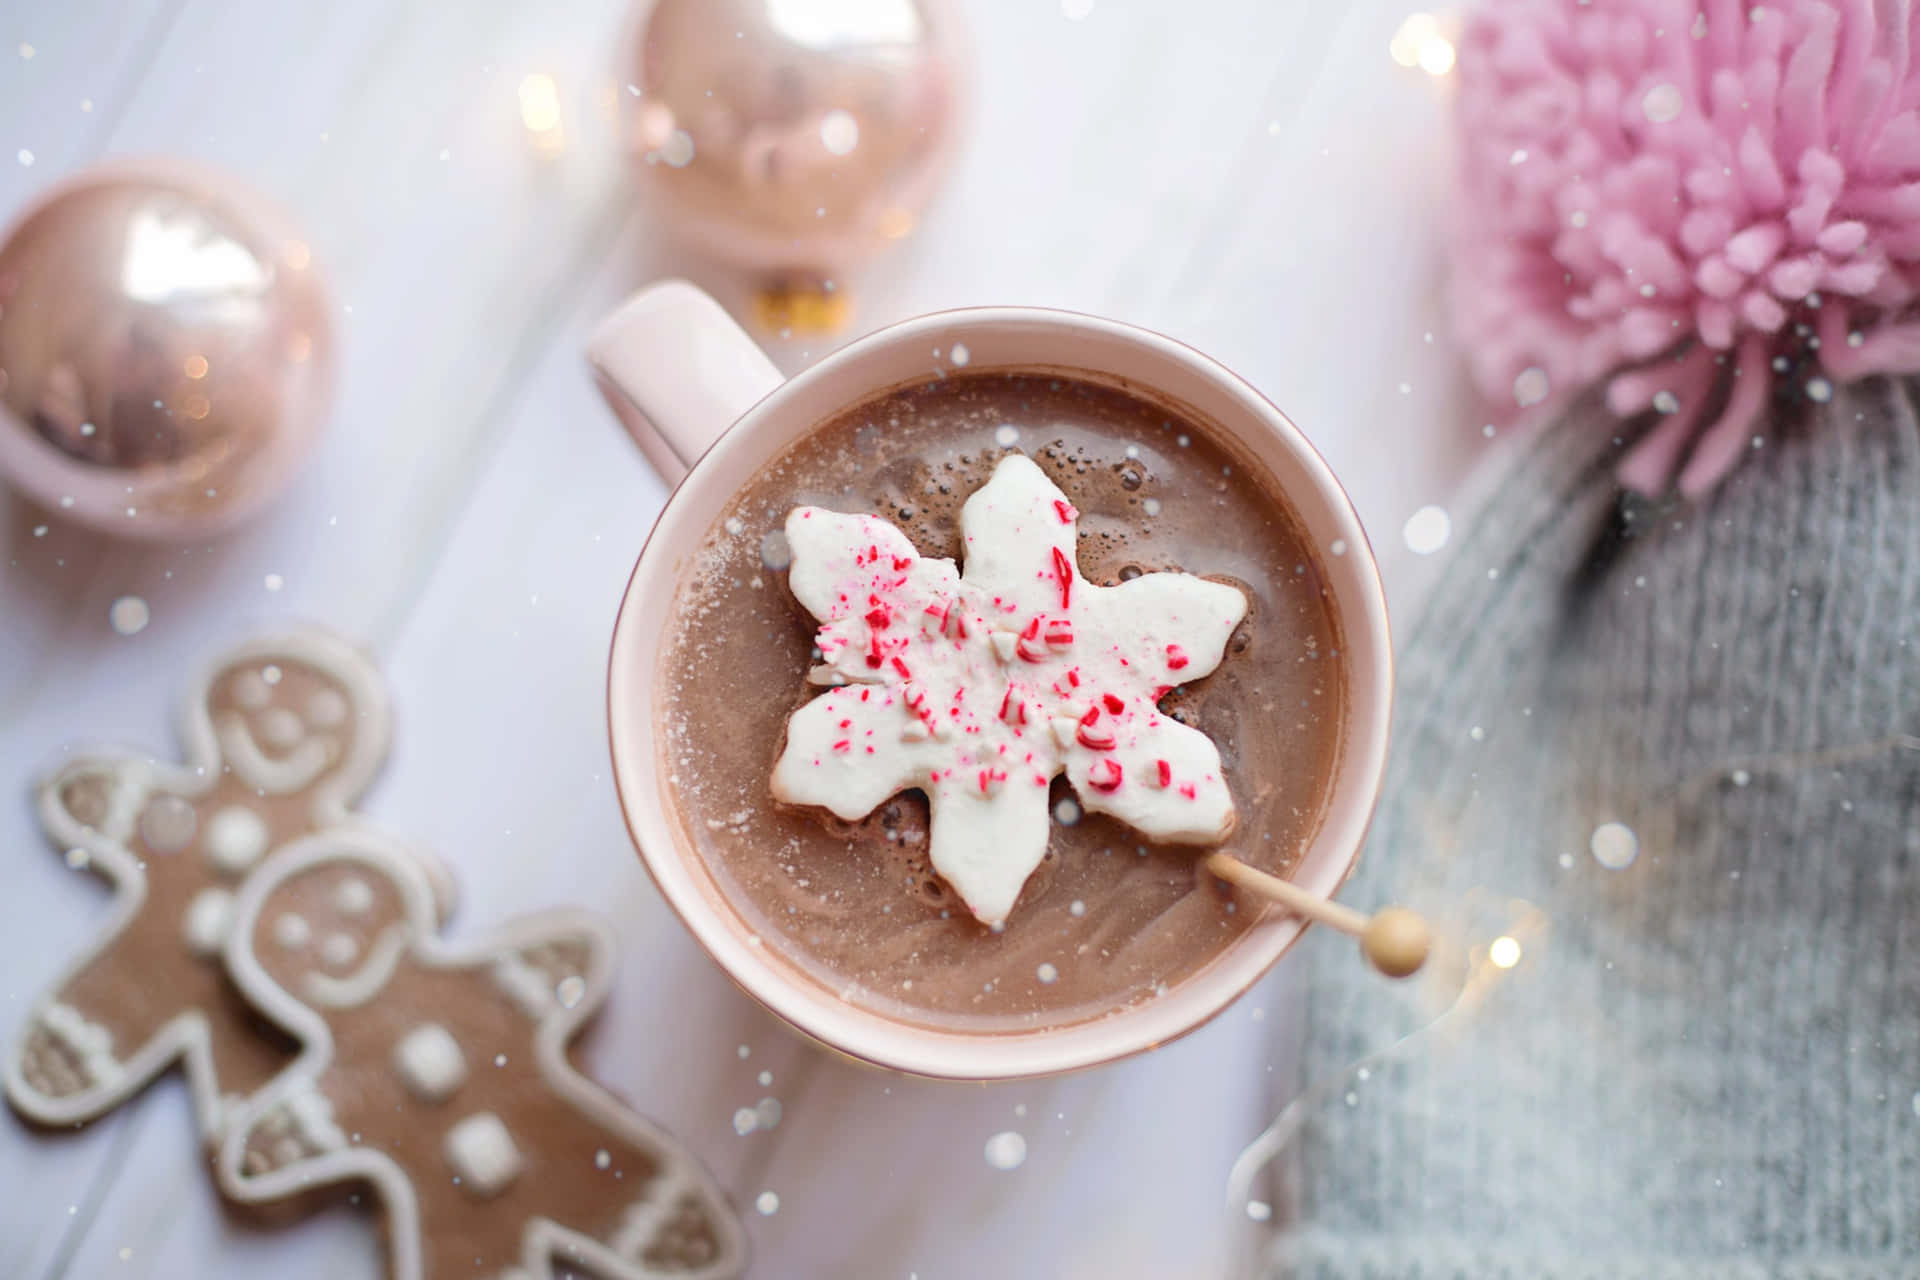 A steaming cup of hot chocolate with whipped cream and chocolate shavings Wallpaper